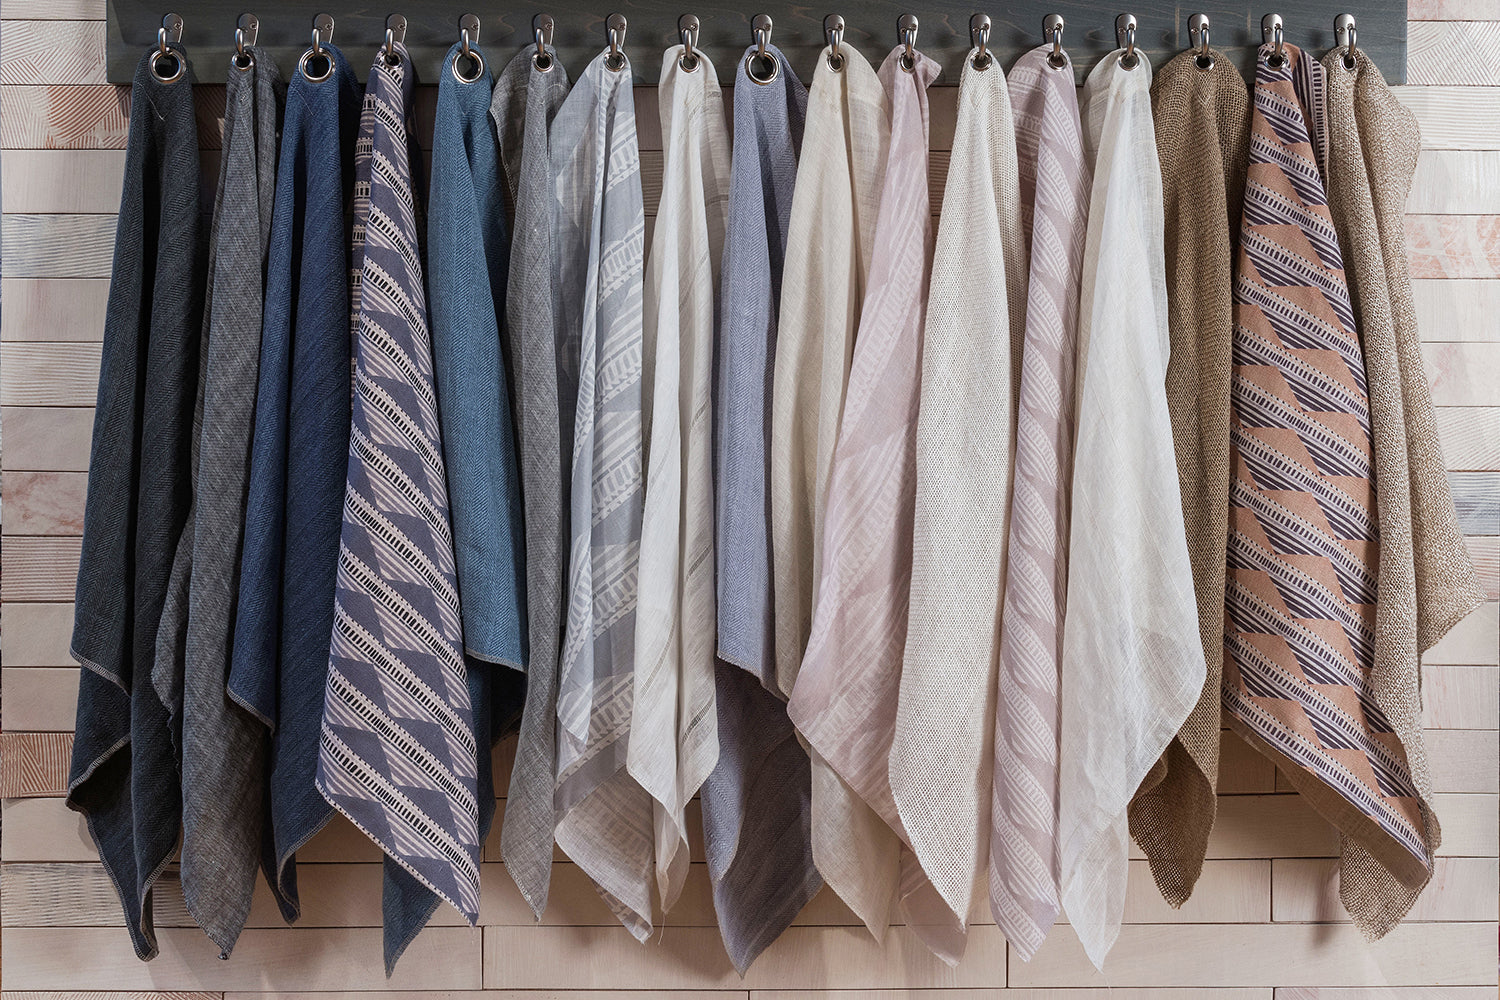 A row of fabric cuttings, hung on on a rack with hooks in a range of charcoal, navy, slate, grey, ivory, beige and tan. 